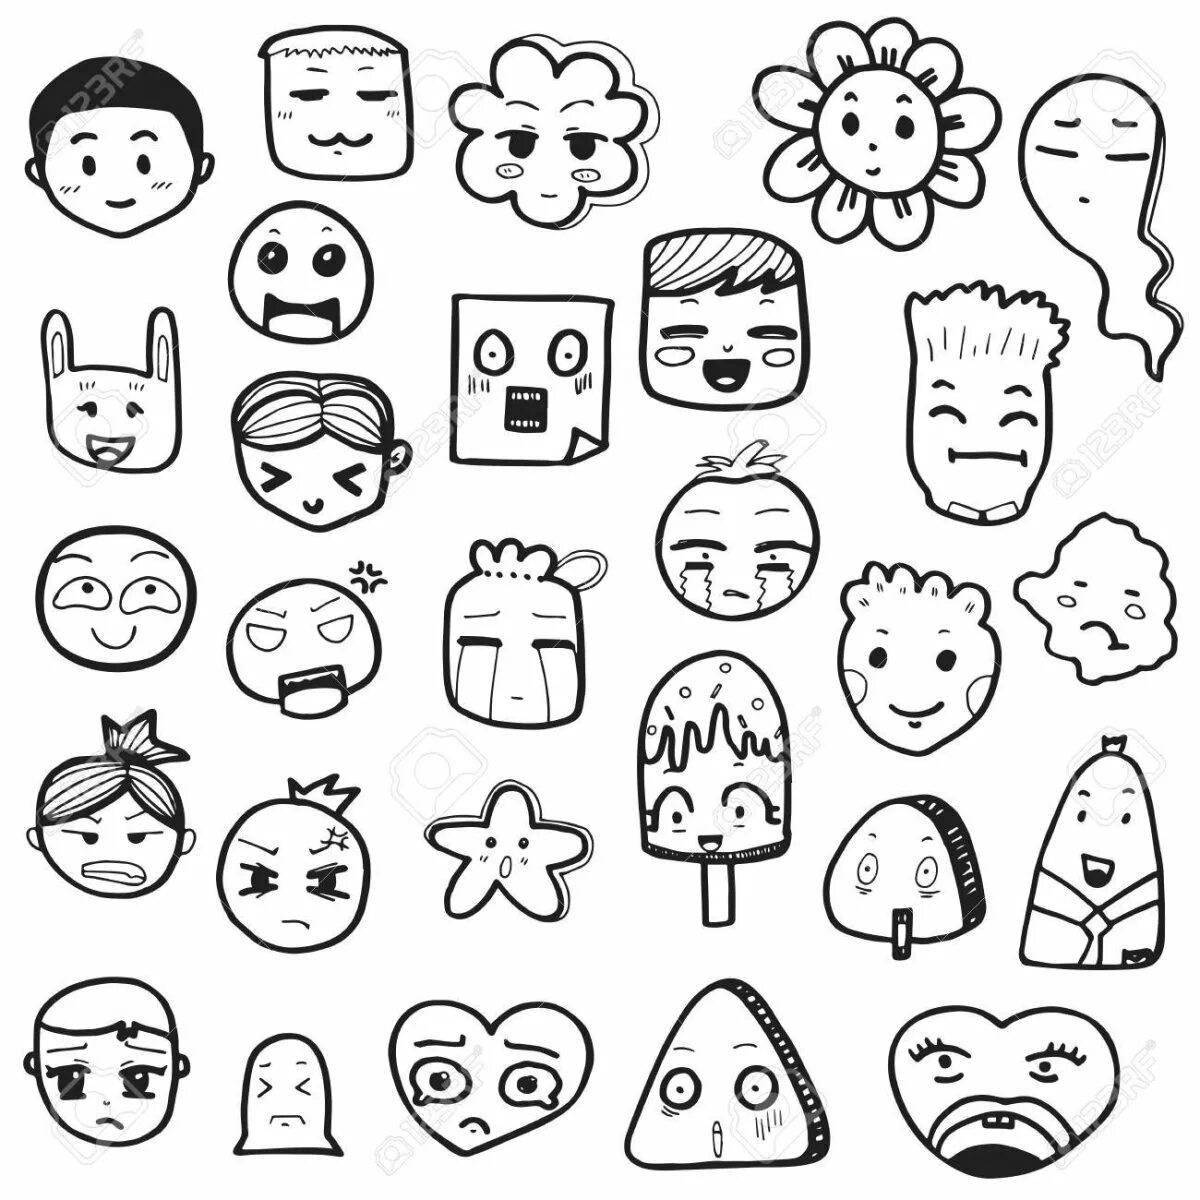 Fun coloring small emoticons for stickers